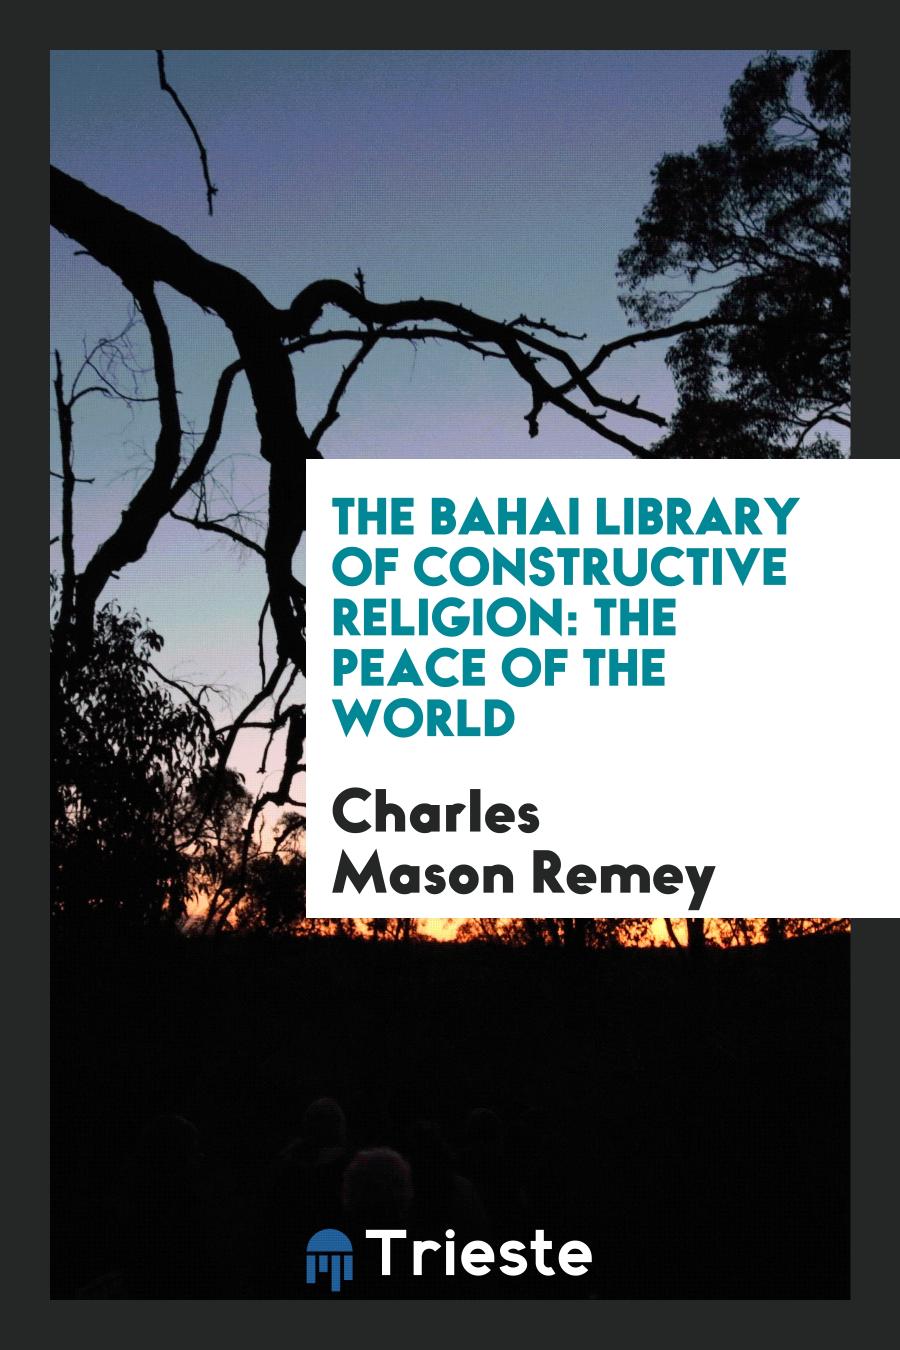 The Bahai Library of Constructive Religion: The Peace of the World